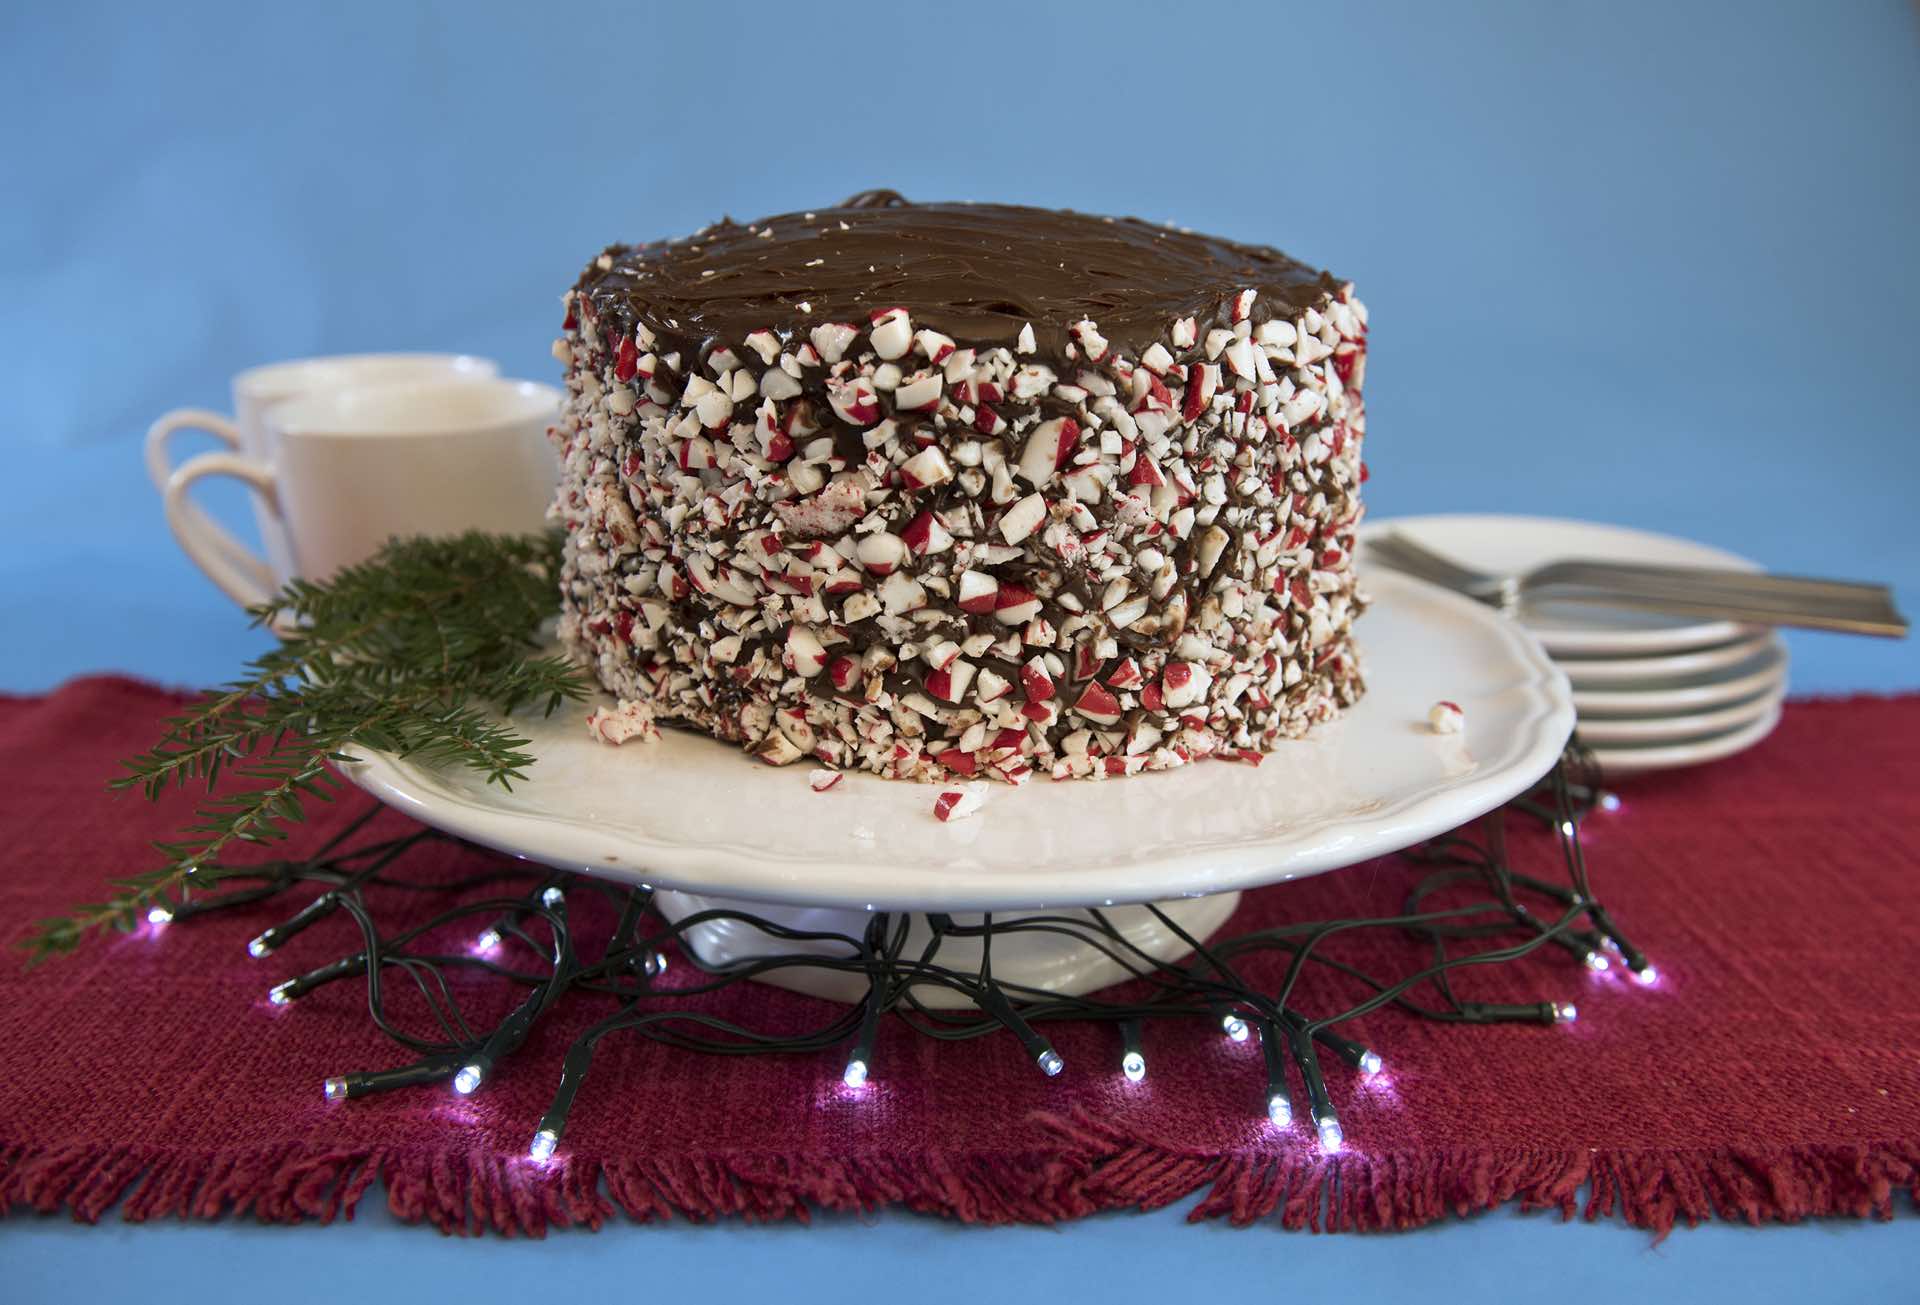 Peppermint chocolate cake made by Marlene Parrish in her home in Mt. Washington. (Haley Nelson/Post-Gazette)